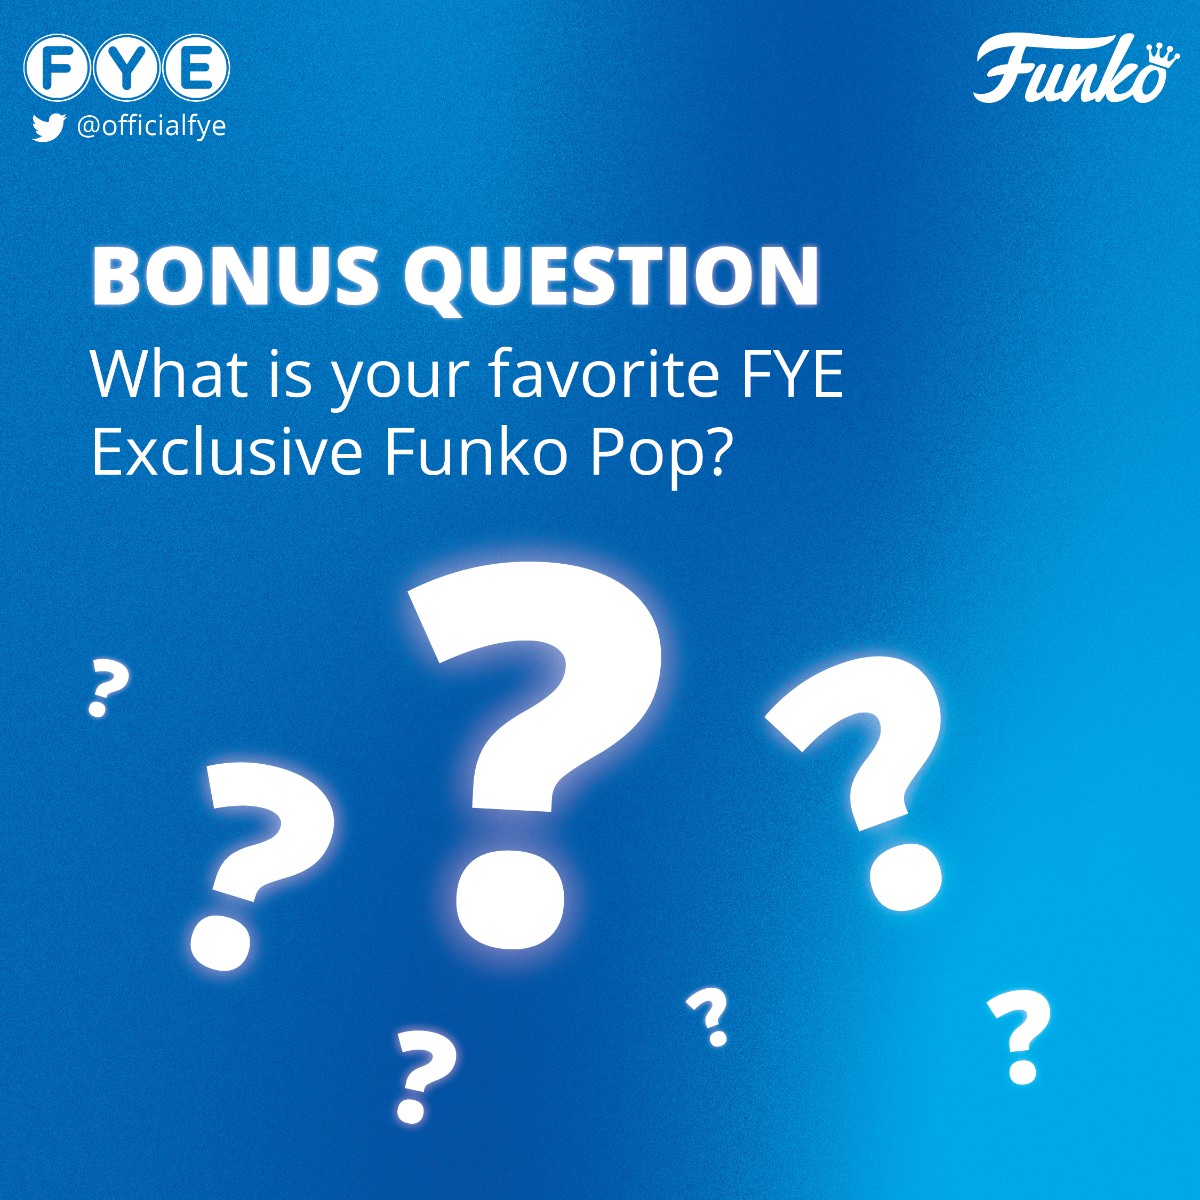 Buy Pop! The Question at Funko.